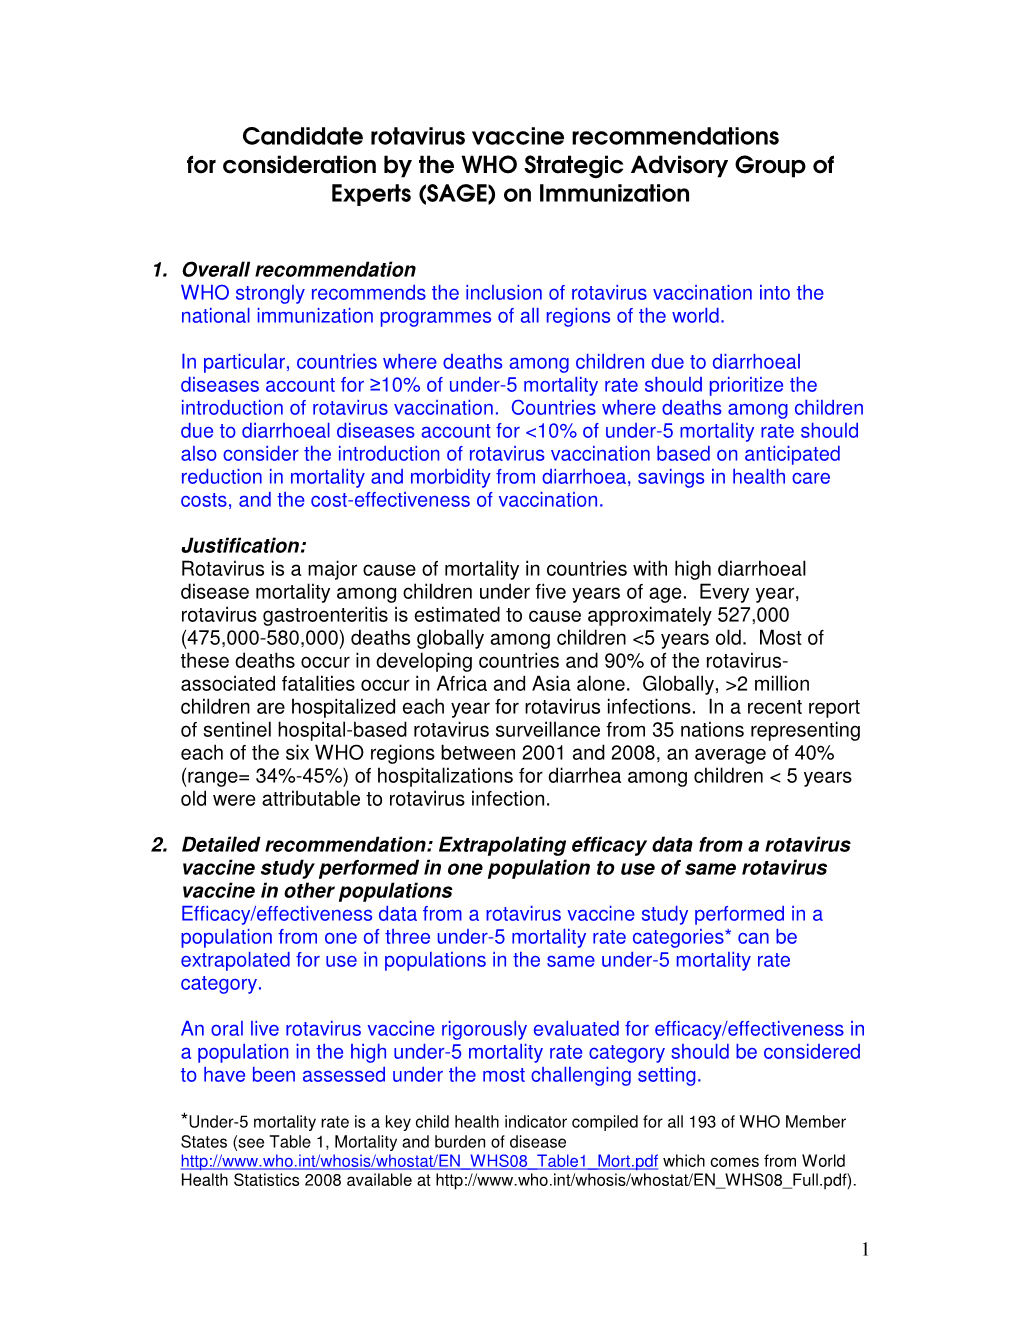 Candidate Rotavirus Vaccine Recommendations for Consideration by the WHO Strategic Advisory Group of Experts (SAGE) on Immunization